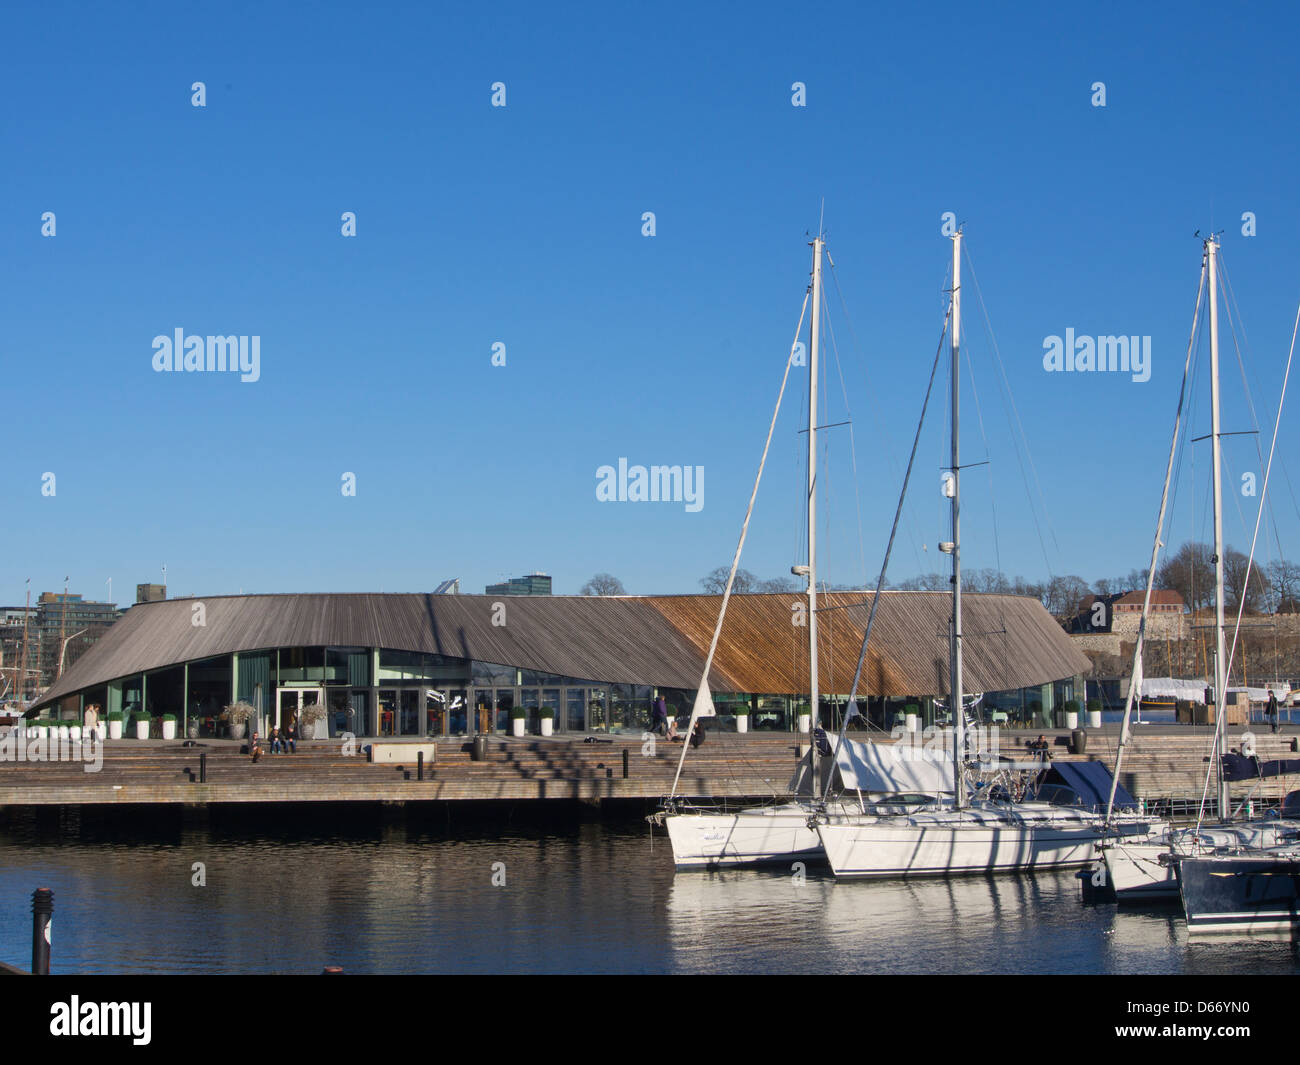 Modern architecture in the Aker Brygge area of the harbour in Oslo Norway wavy facade in wood and glass for the restaurant Onda Stock Photo